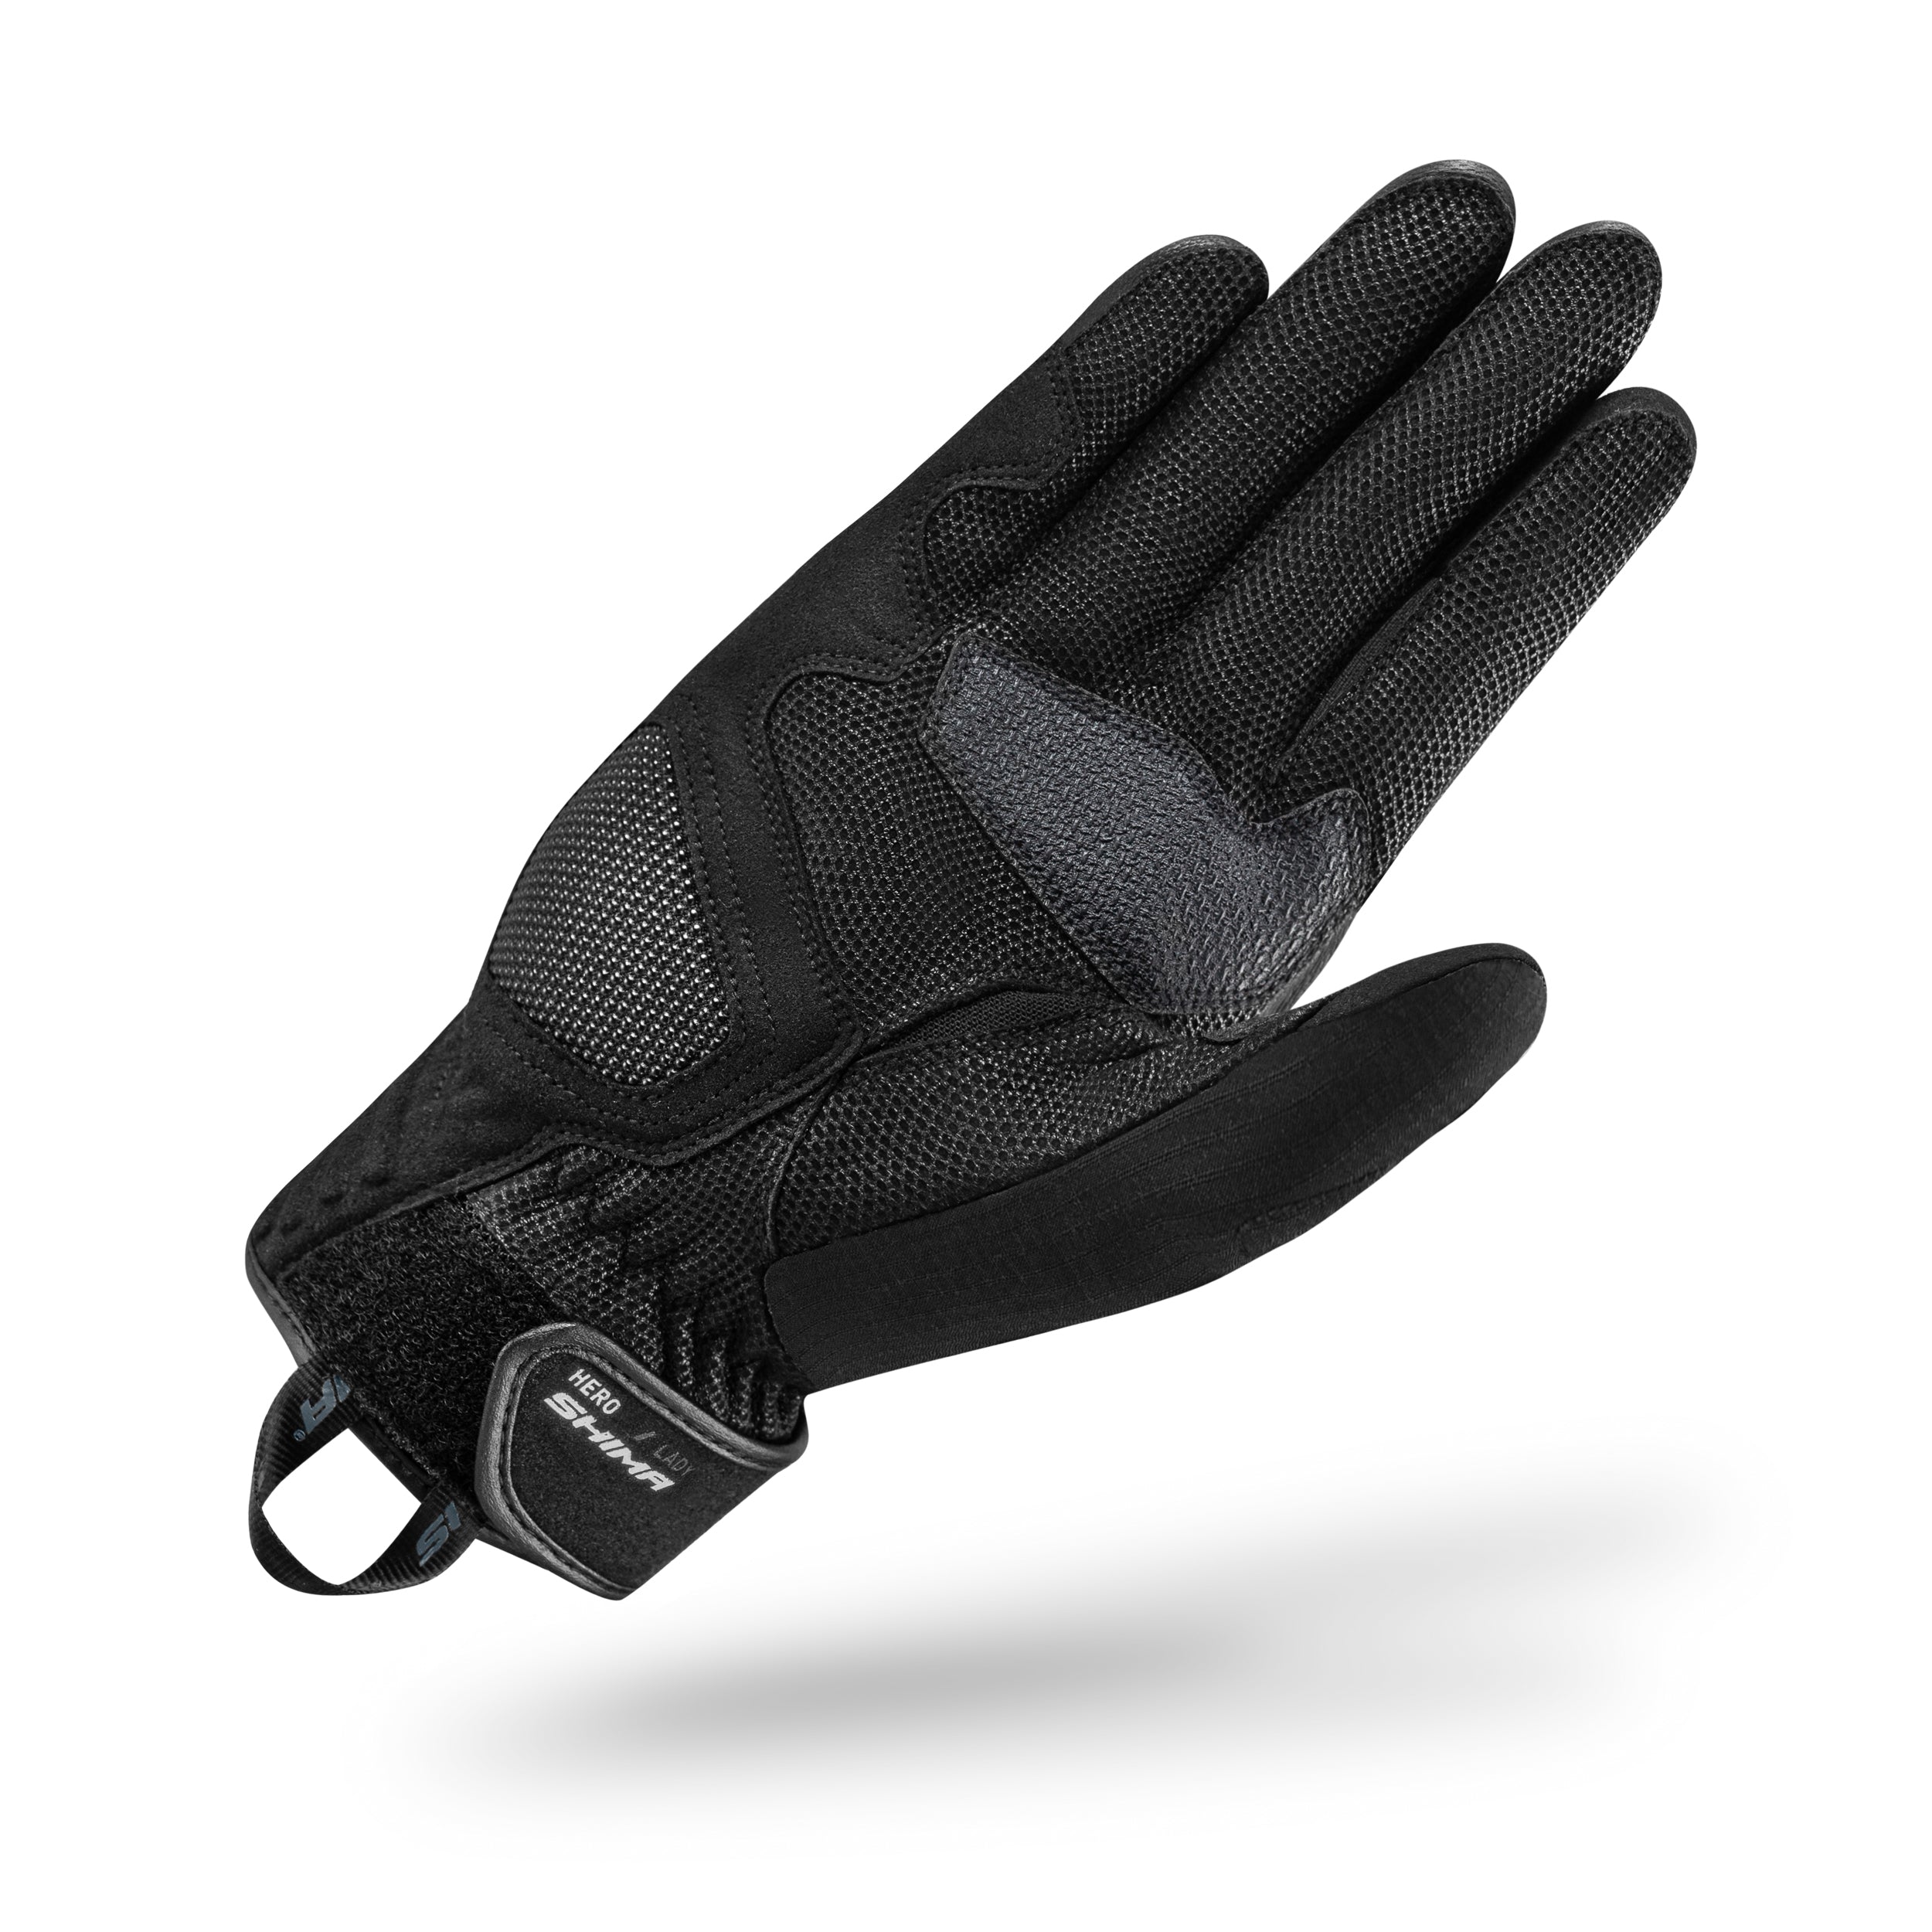 A palm of black short women's motorcycle gloves from Shima